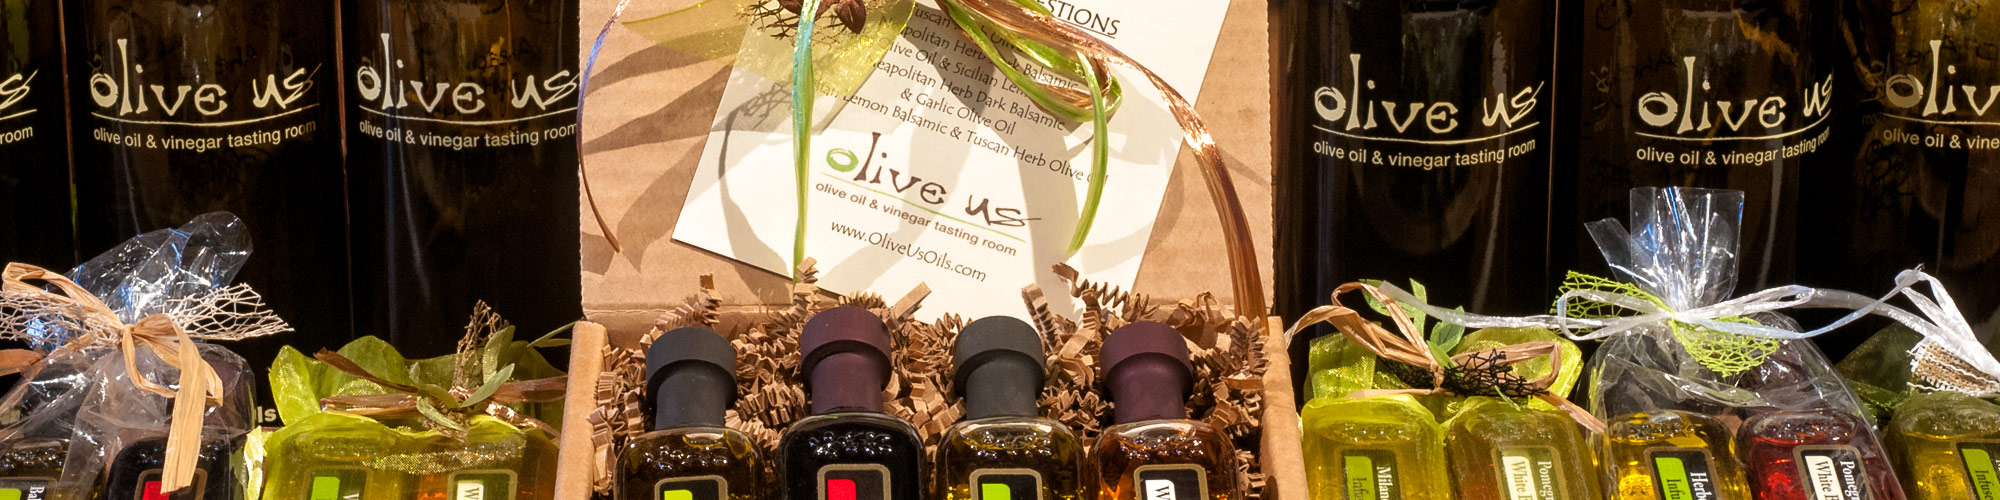 Olive Us Oils – Go Ahead… Play With